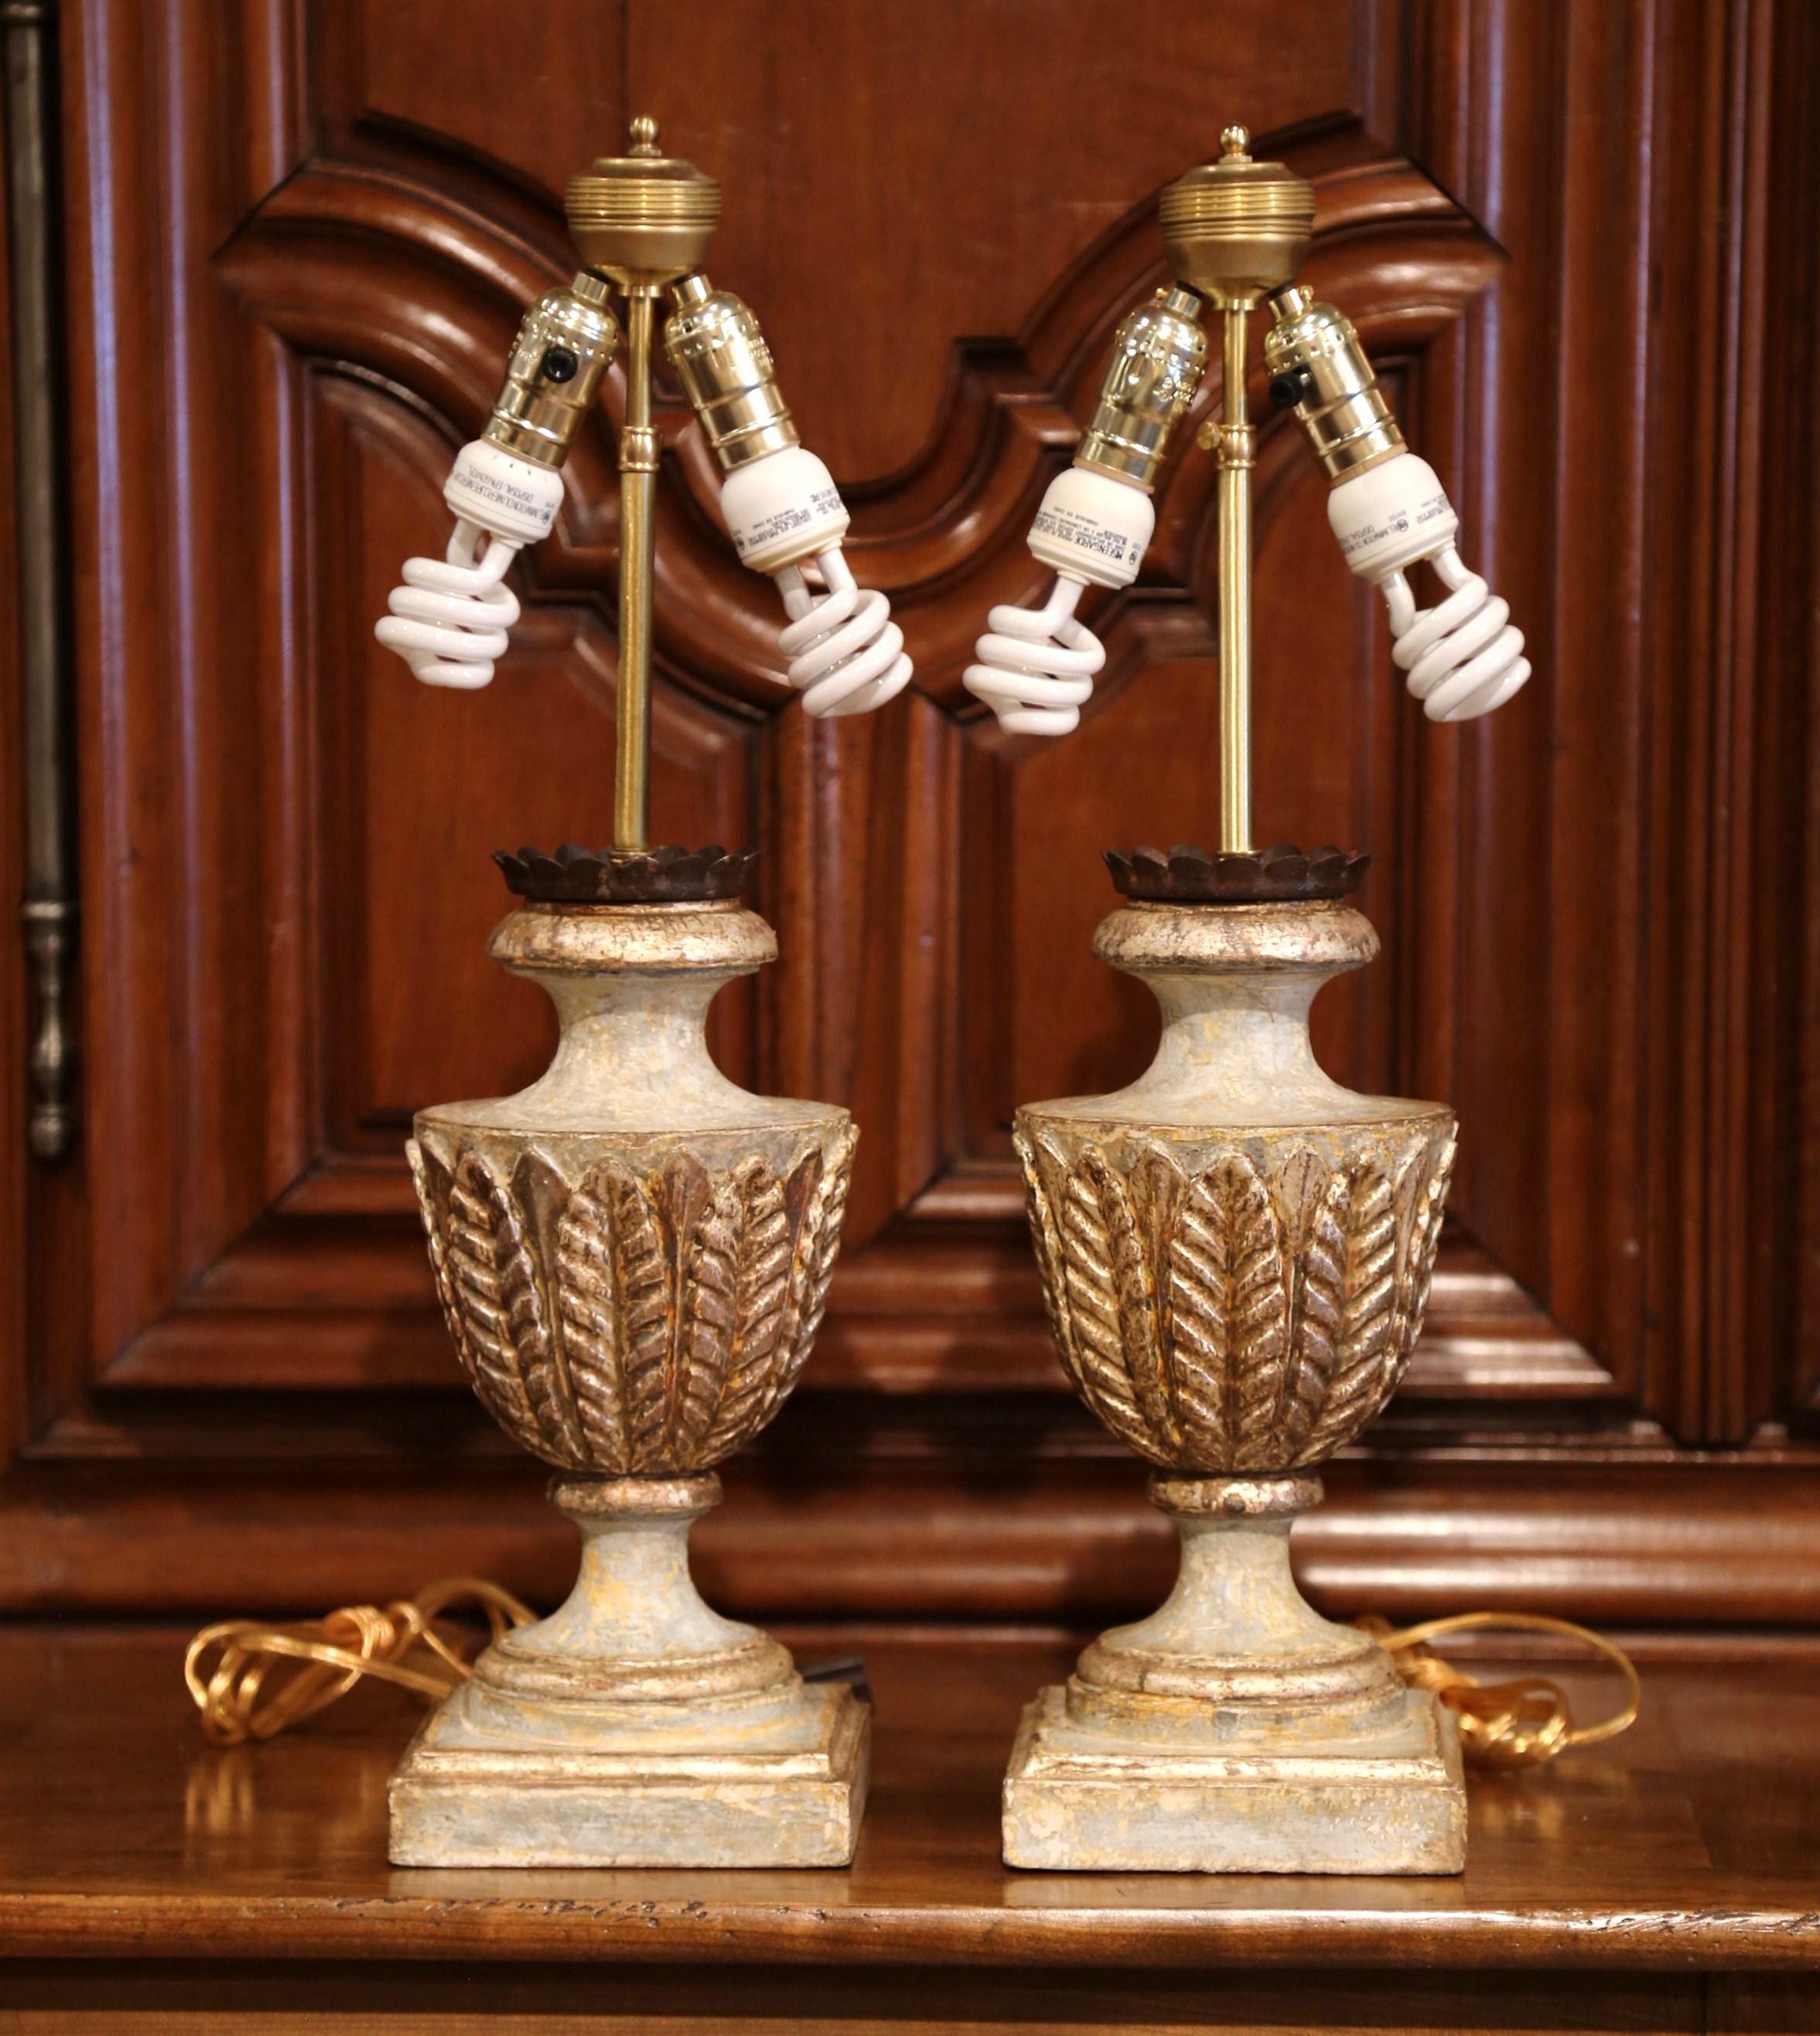 Incorporate extra light into a living room or bedroom with this elegant pair of hand-carved and hand-painted wood lamp bases from Italy. The large, stately bases are in the shape of a traditional antique urn and are embellished with carved acanthus